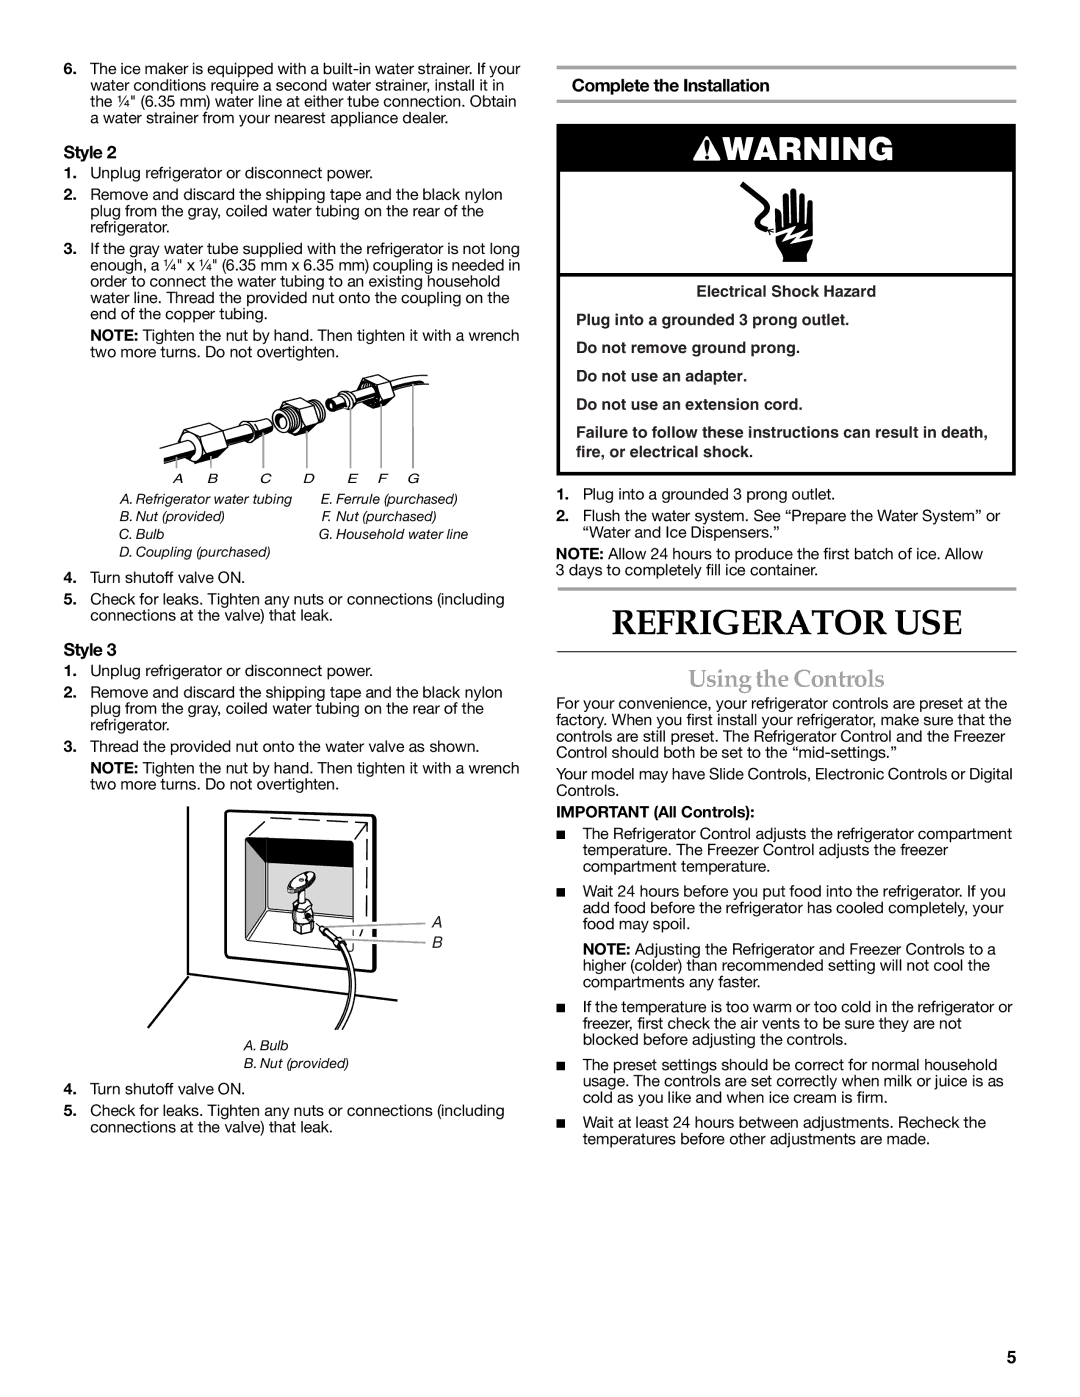 KitchenAid 2315184A warranty Refrigerator USE, Using the Controls, Complete the Installation, Important All Controls 